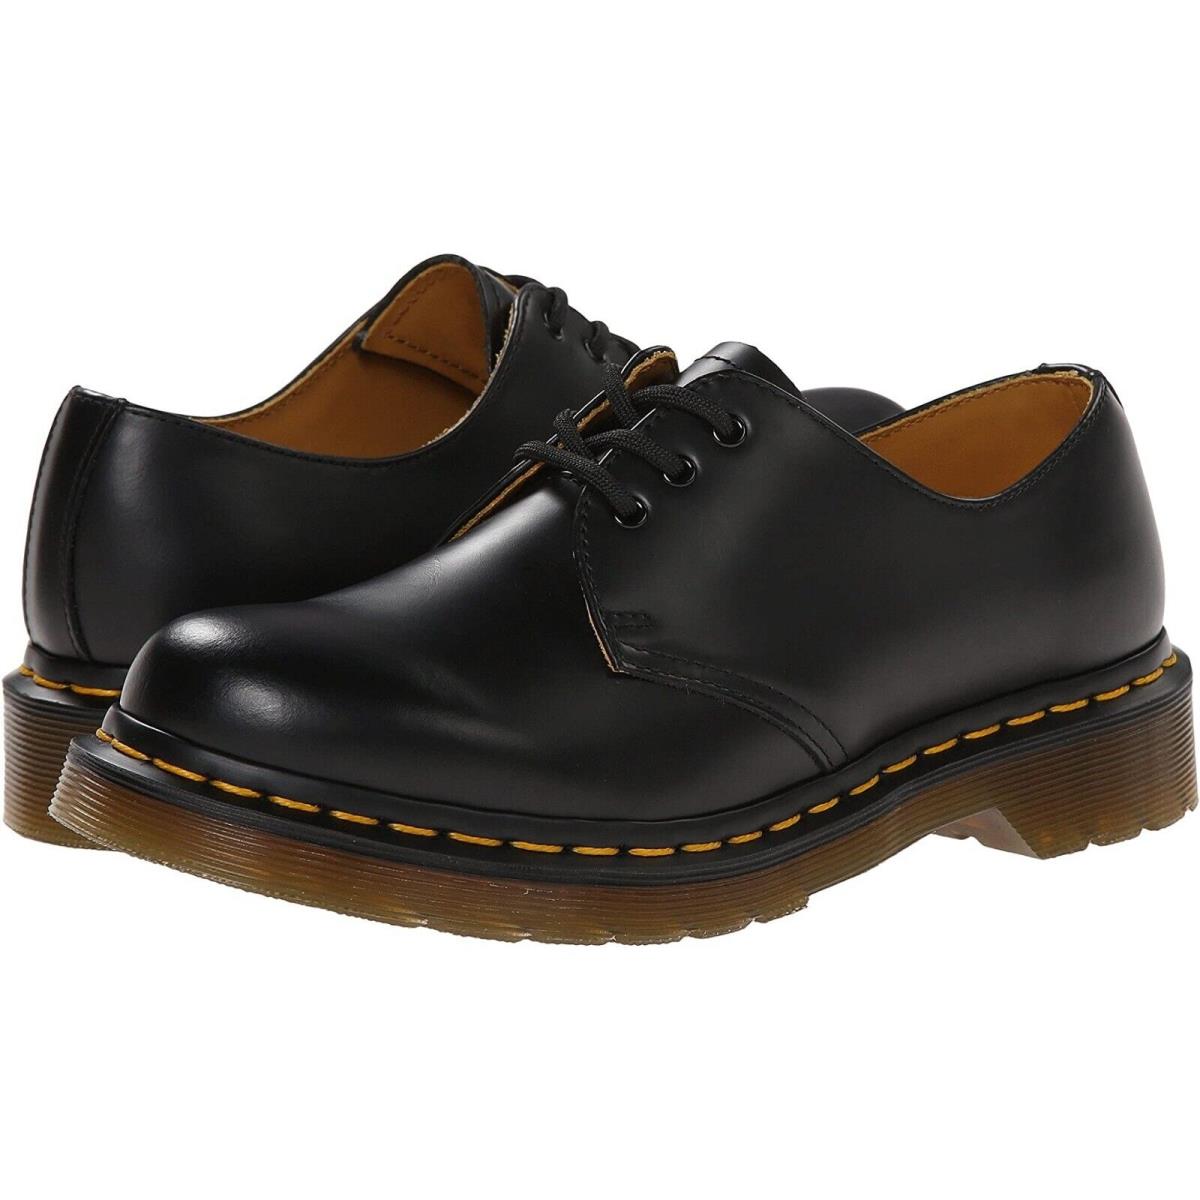 Women`s Shoes Dr. Martens 1461 3-EYE Leather Oxfords 11837002 Black Smooth